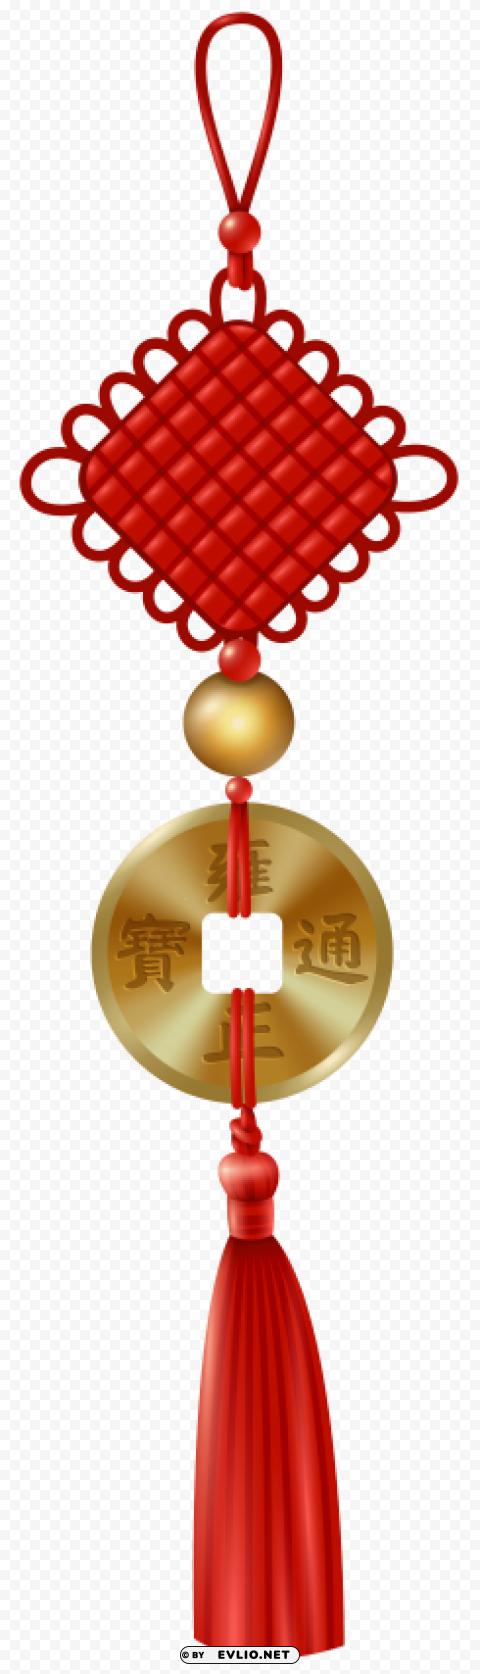 chinese hanging decor PNG images transparent pack